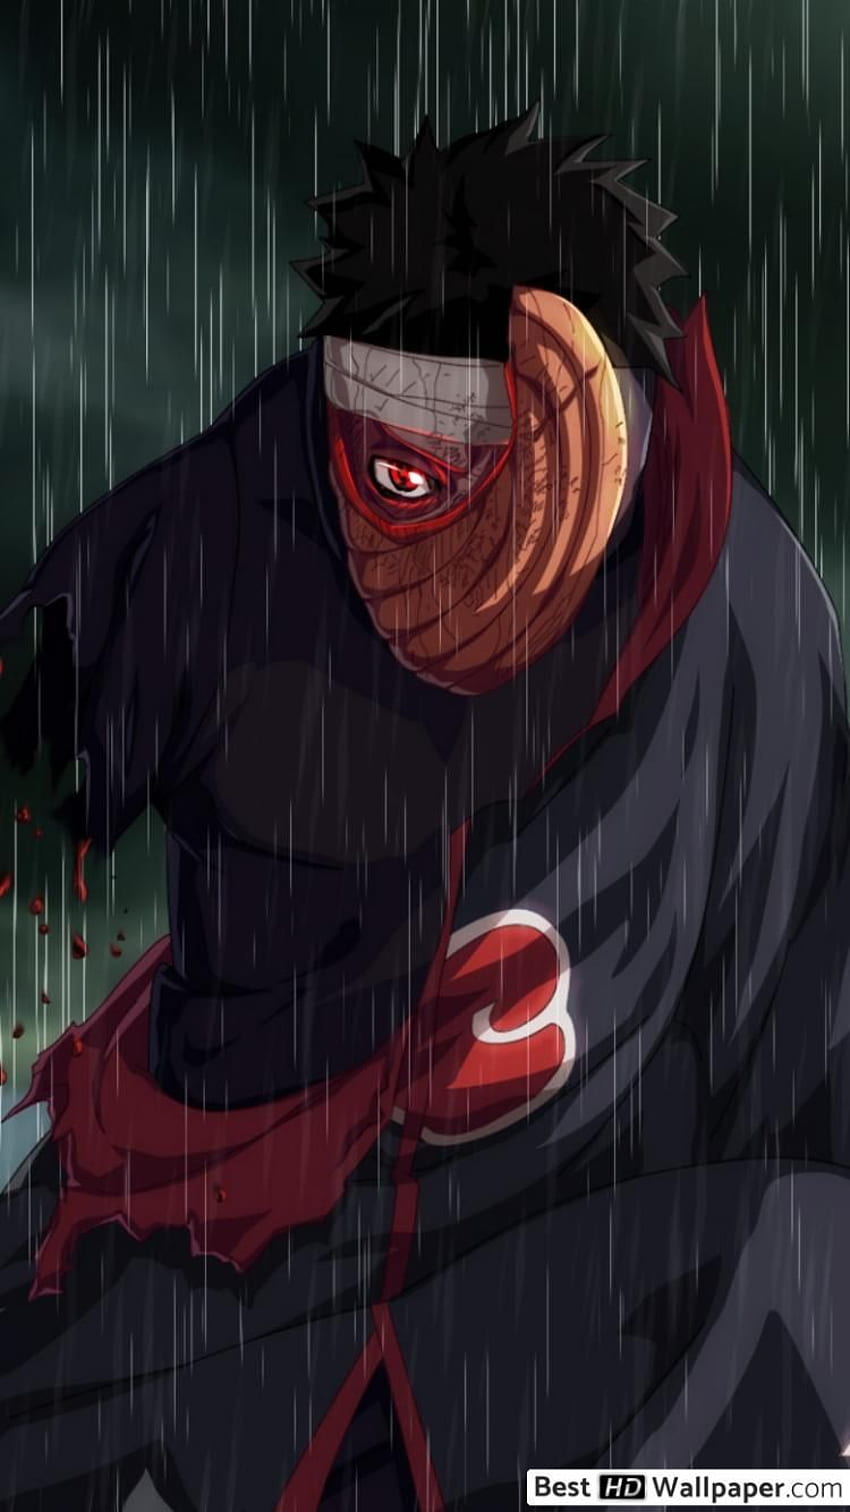 Obito iPhone Wallpapers Top 25 Best Obito iPhone Wallpapers  Getty  Wallpapers